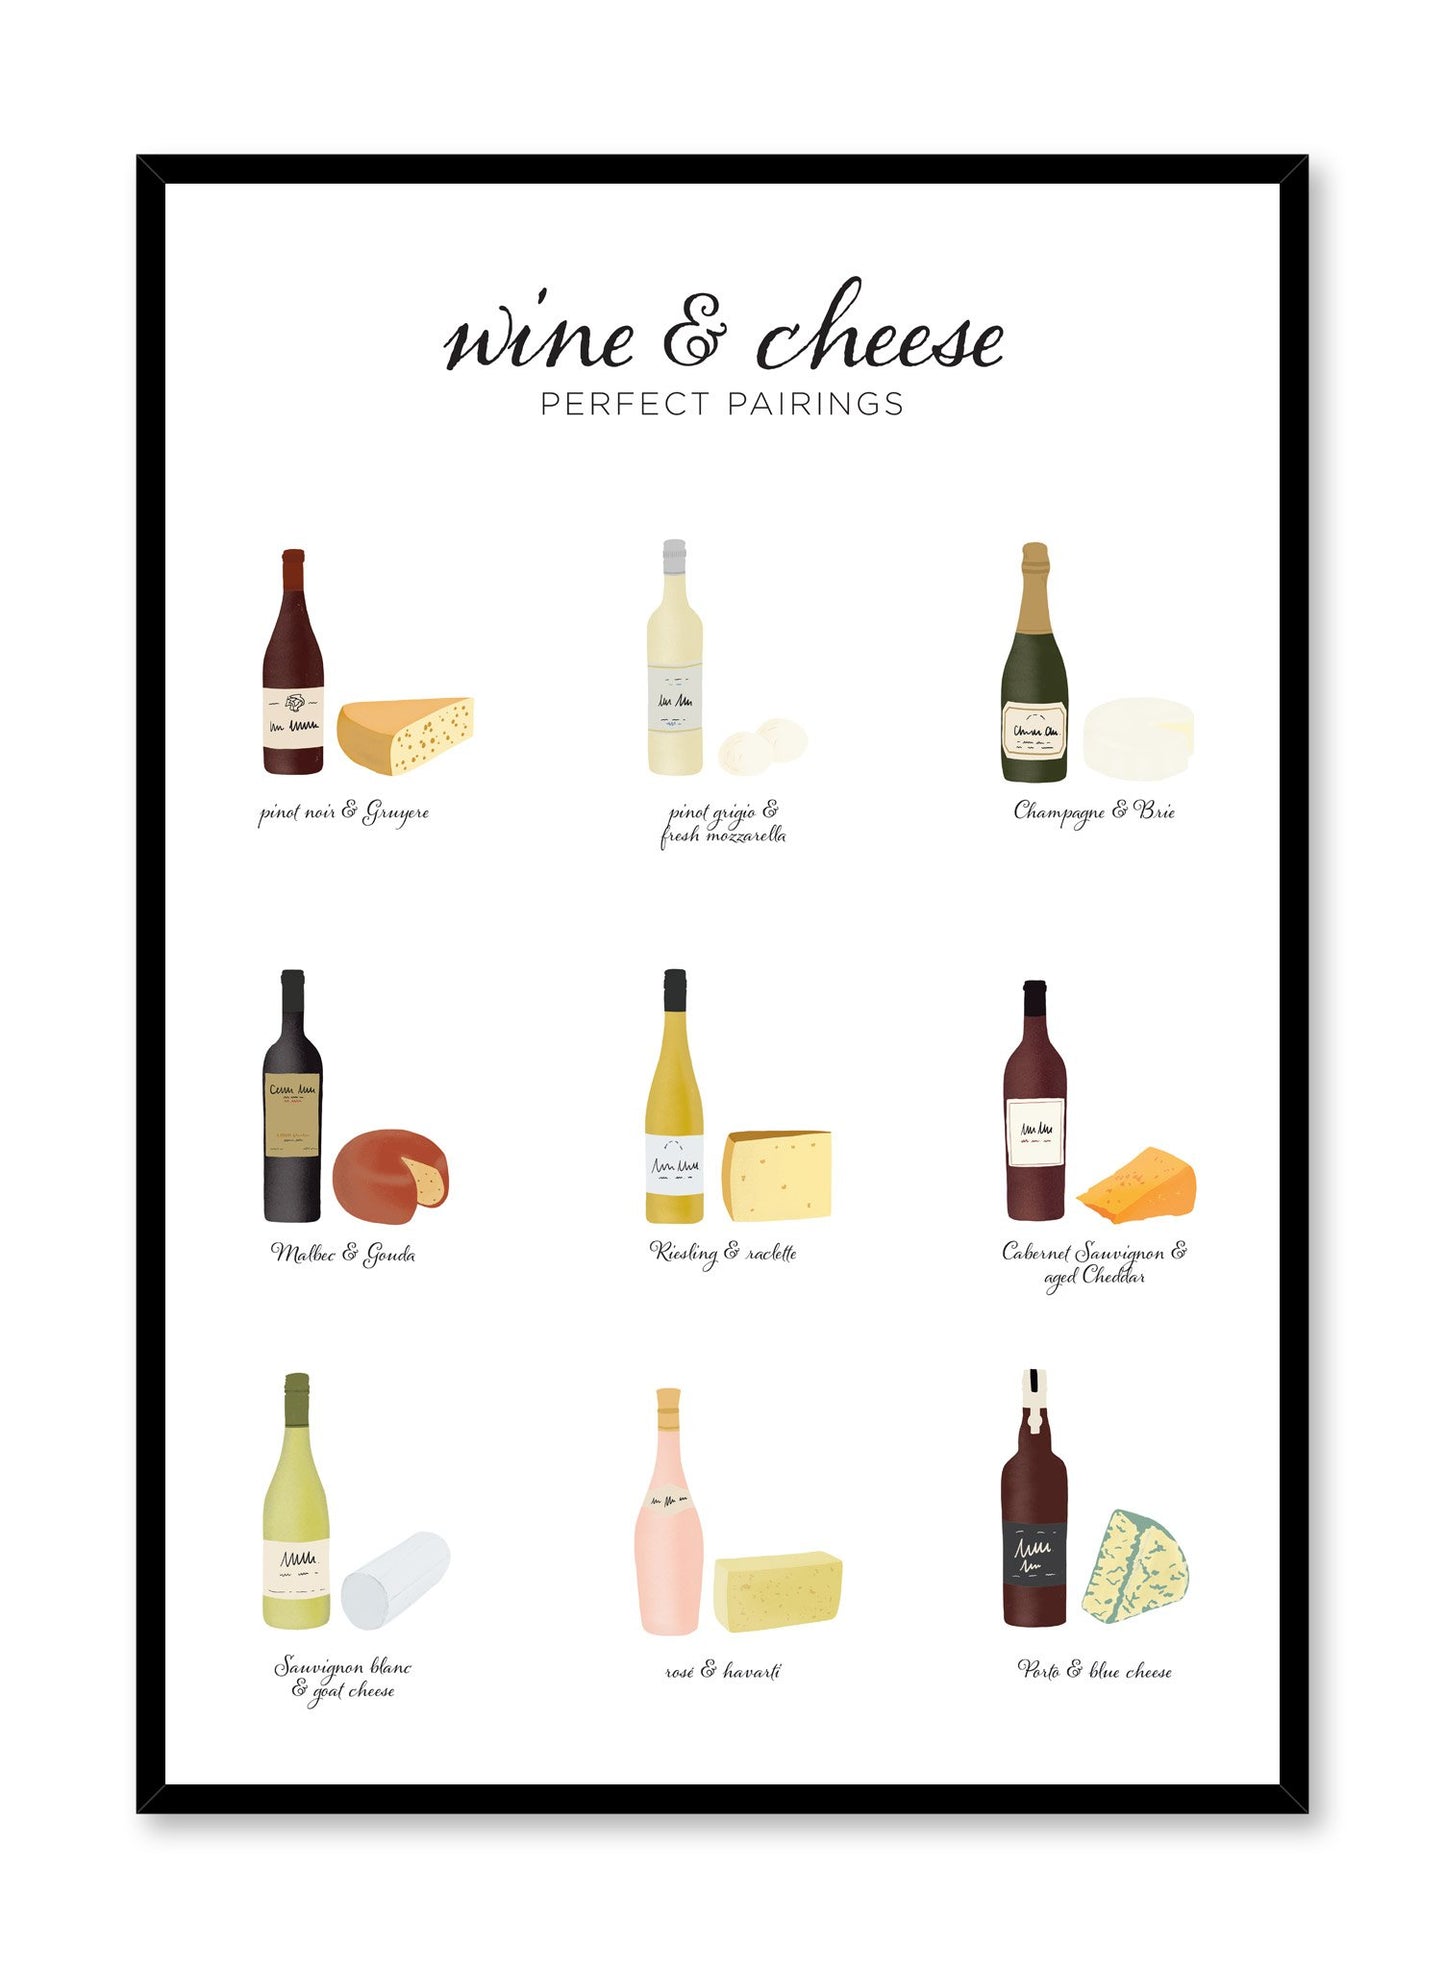 Wine & Cheese Pairings is an illustrated wine and cheese poster guide by Opposite Wall.